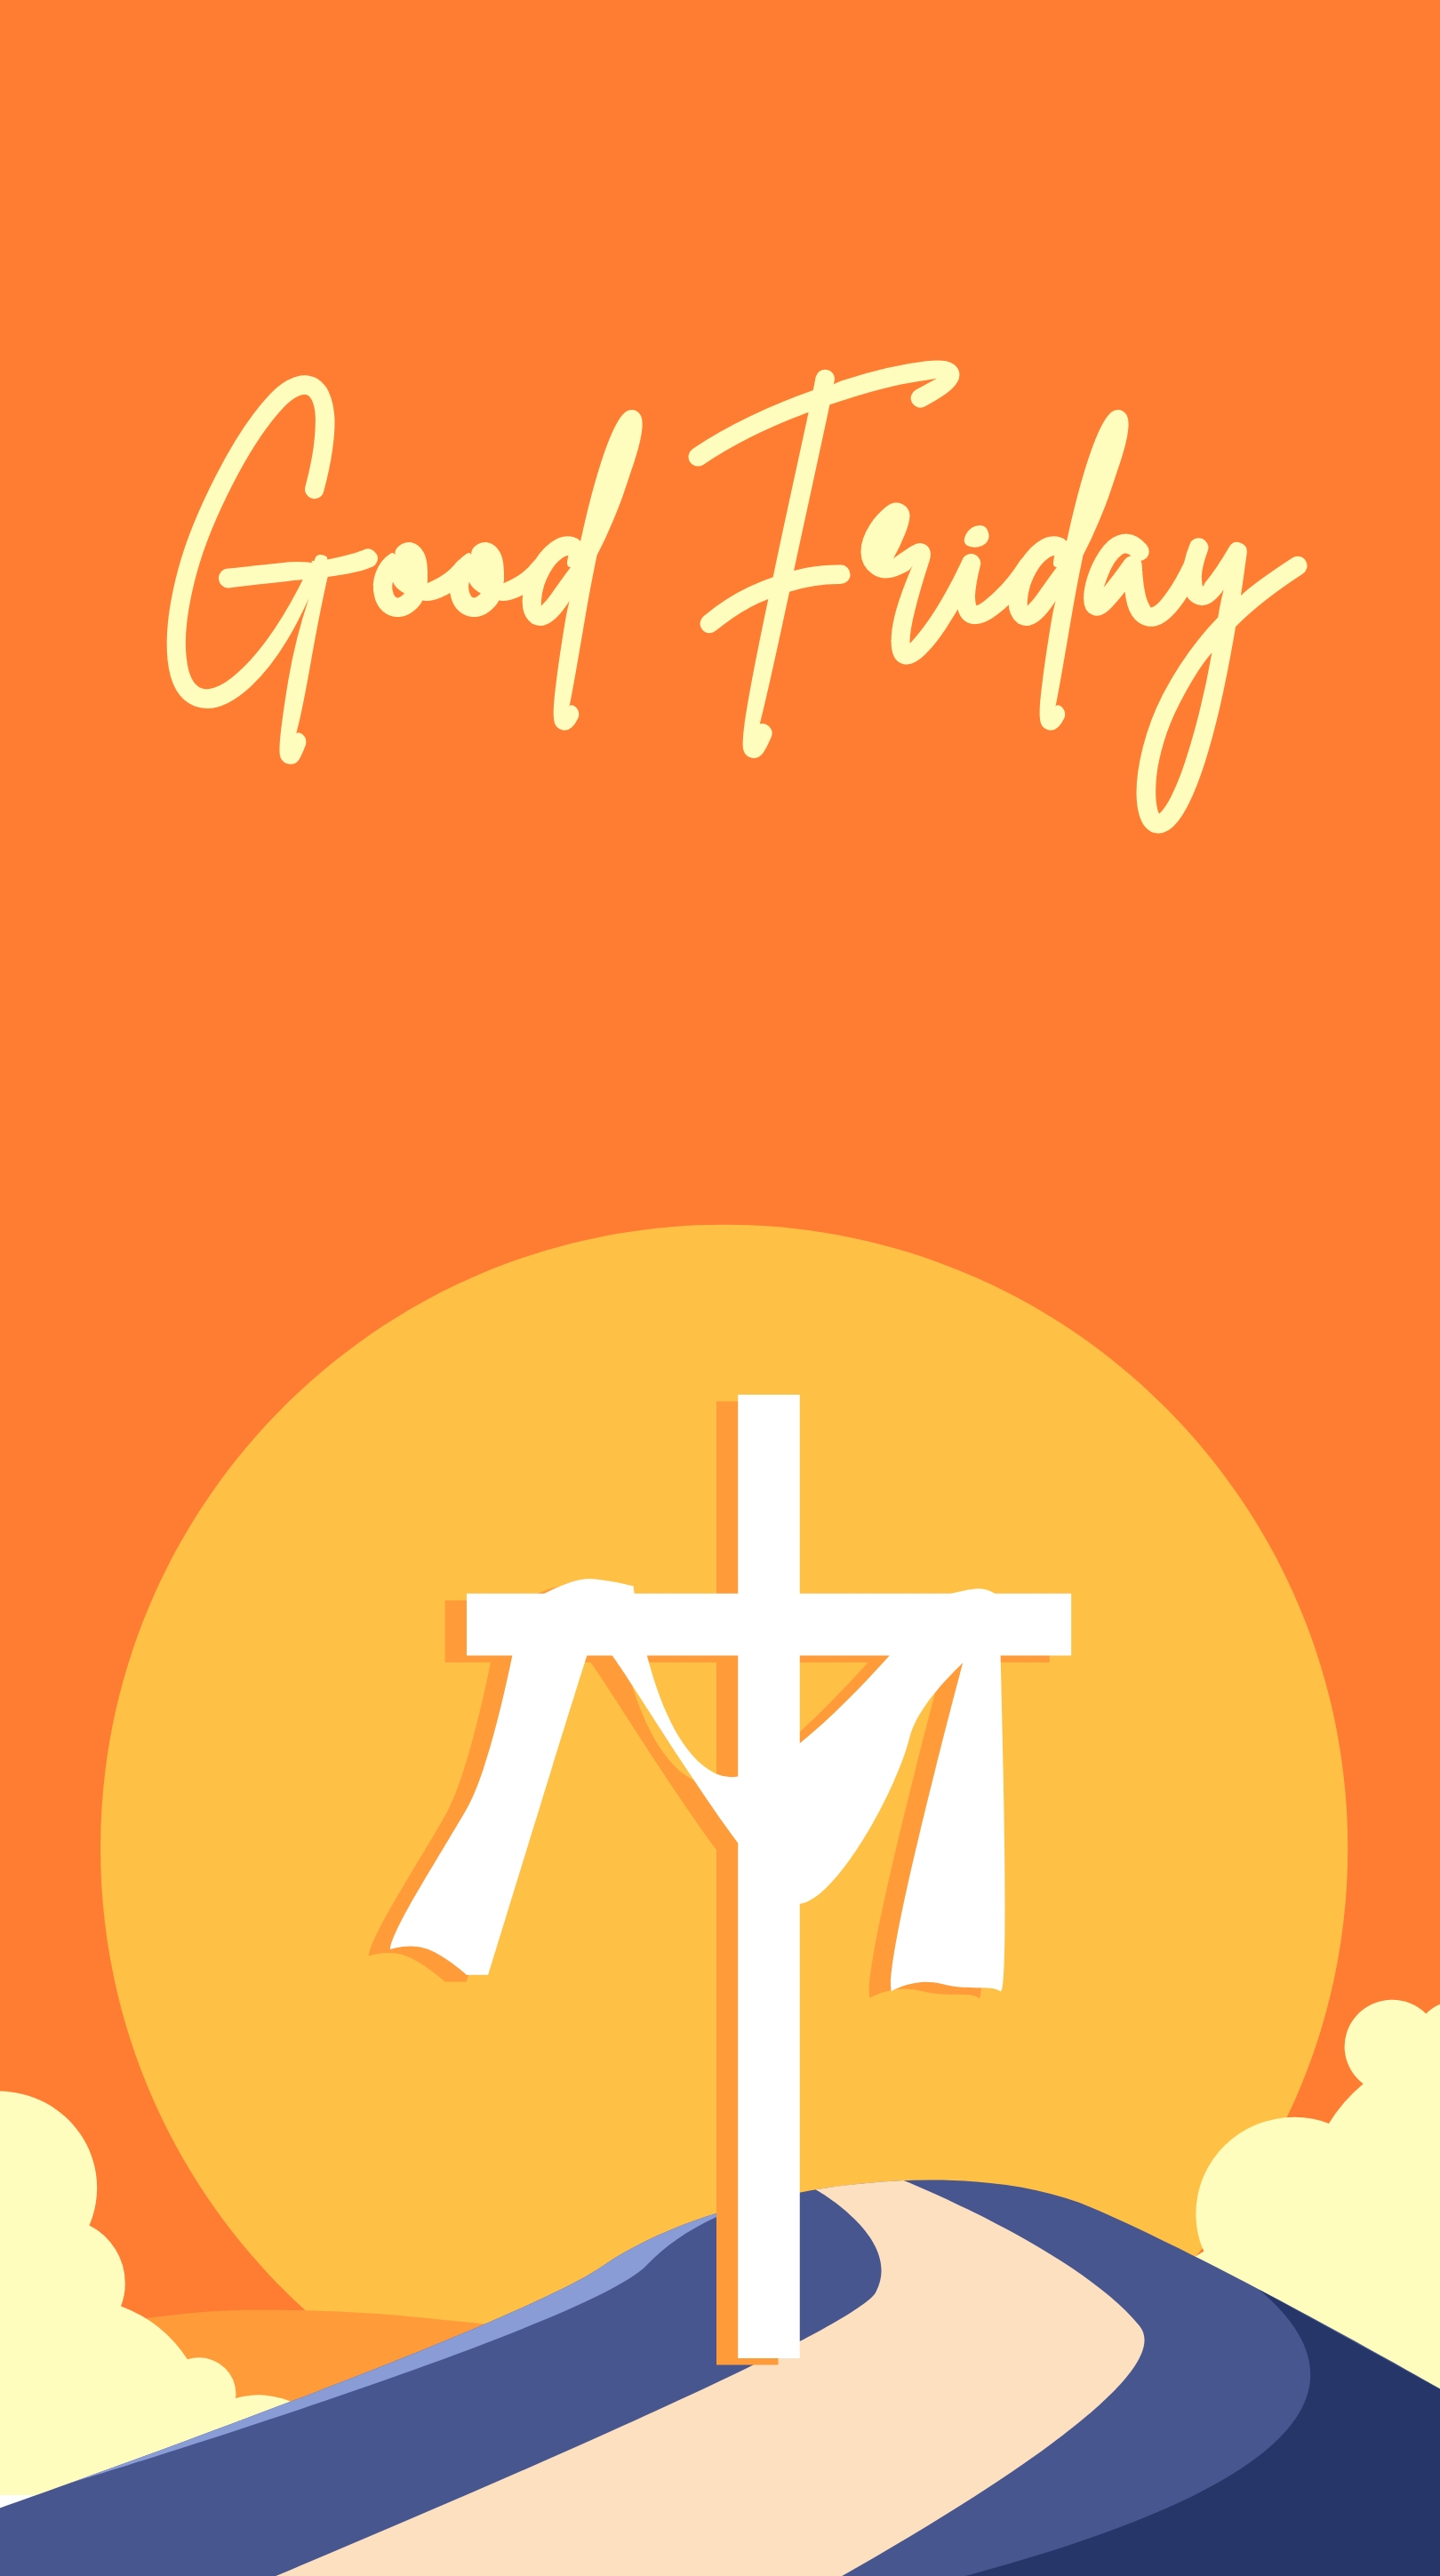 Free Good Friday iPhone Background in PDF, Illustrator, PSD, EPS, SVG, JPG, PNG